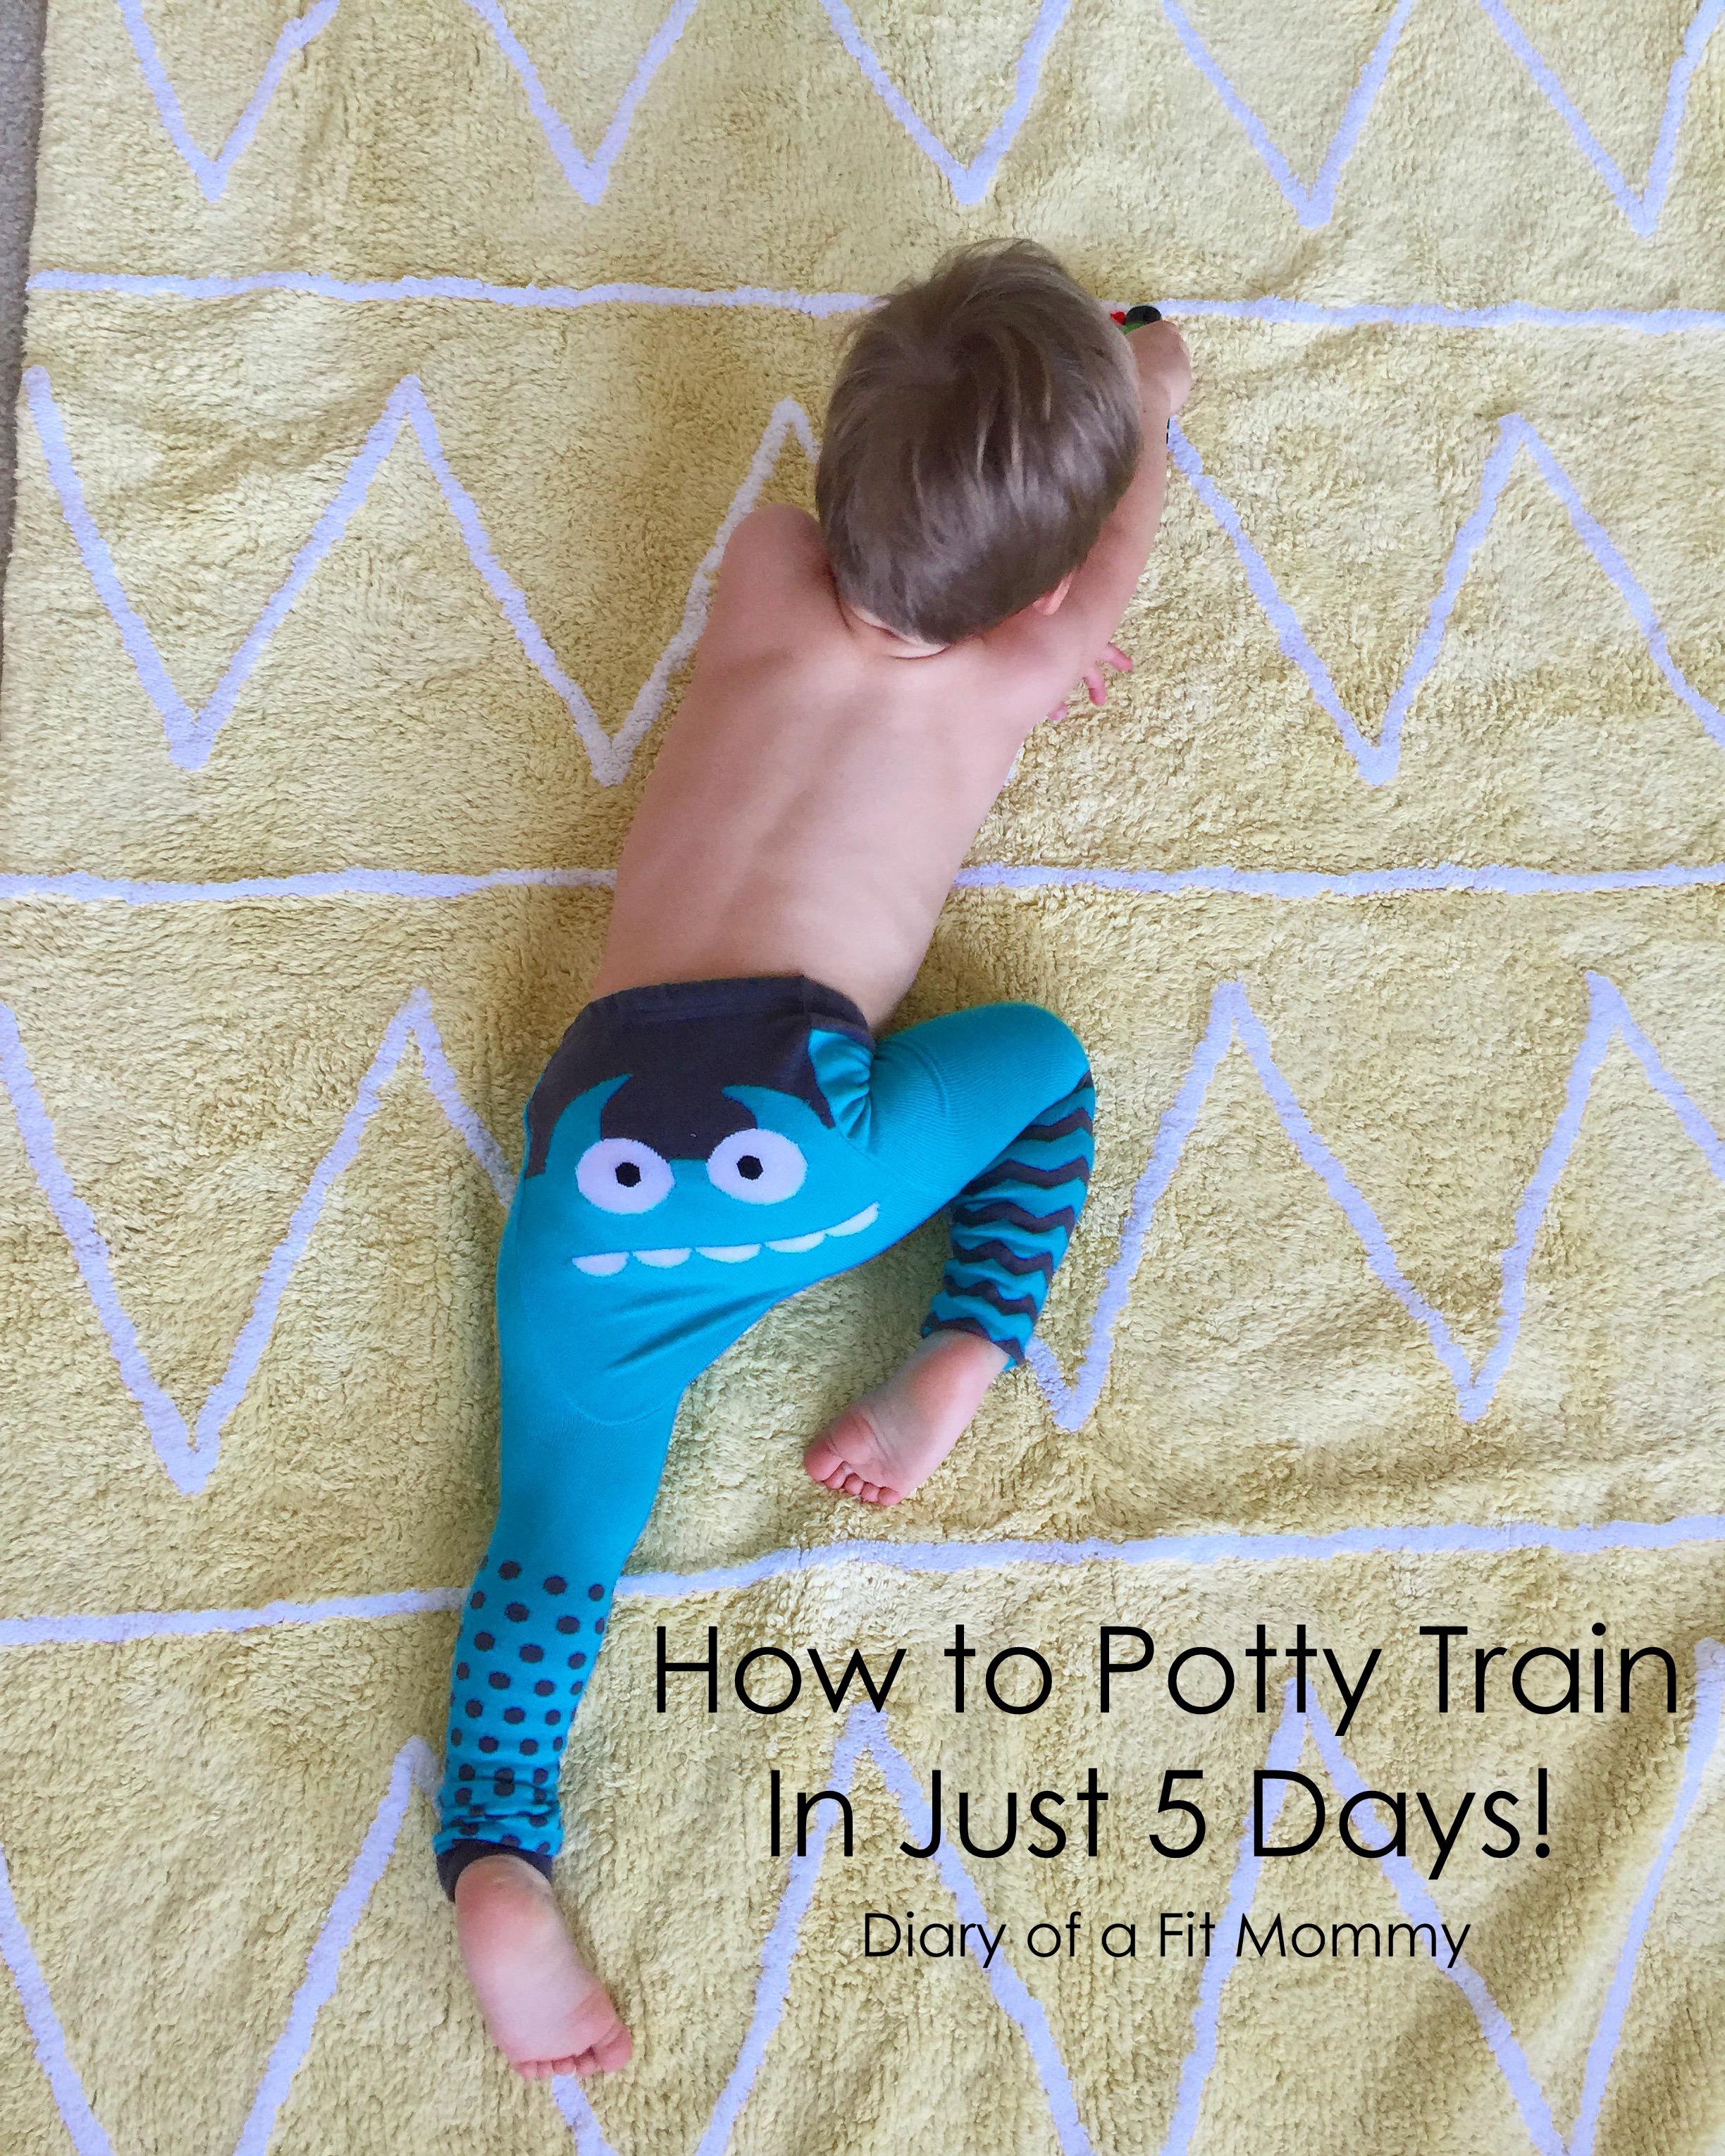 How to potty train your child in just 3 days